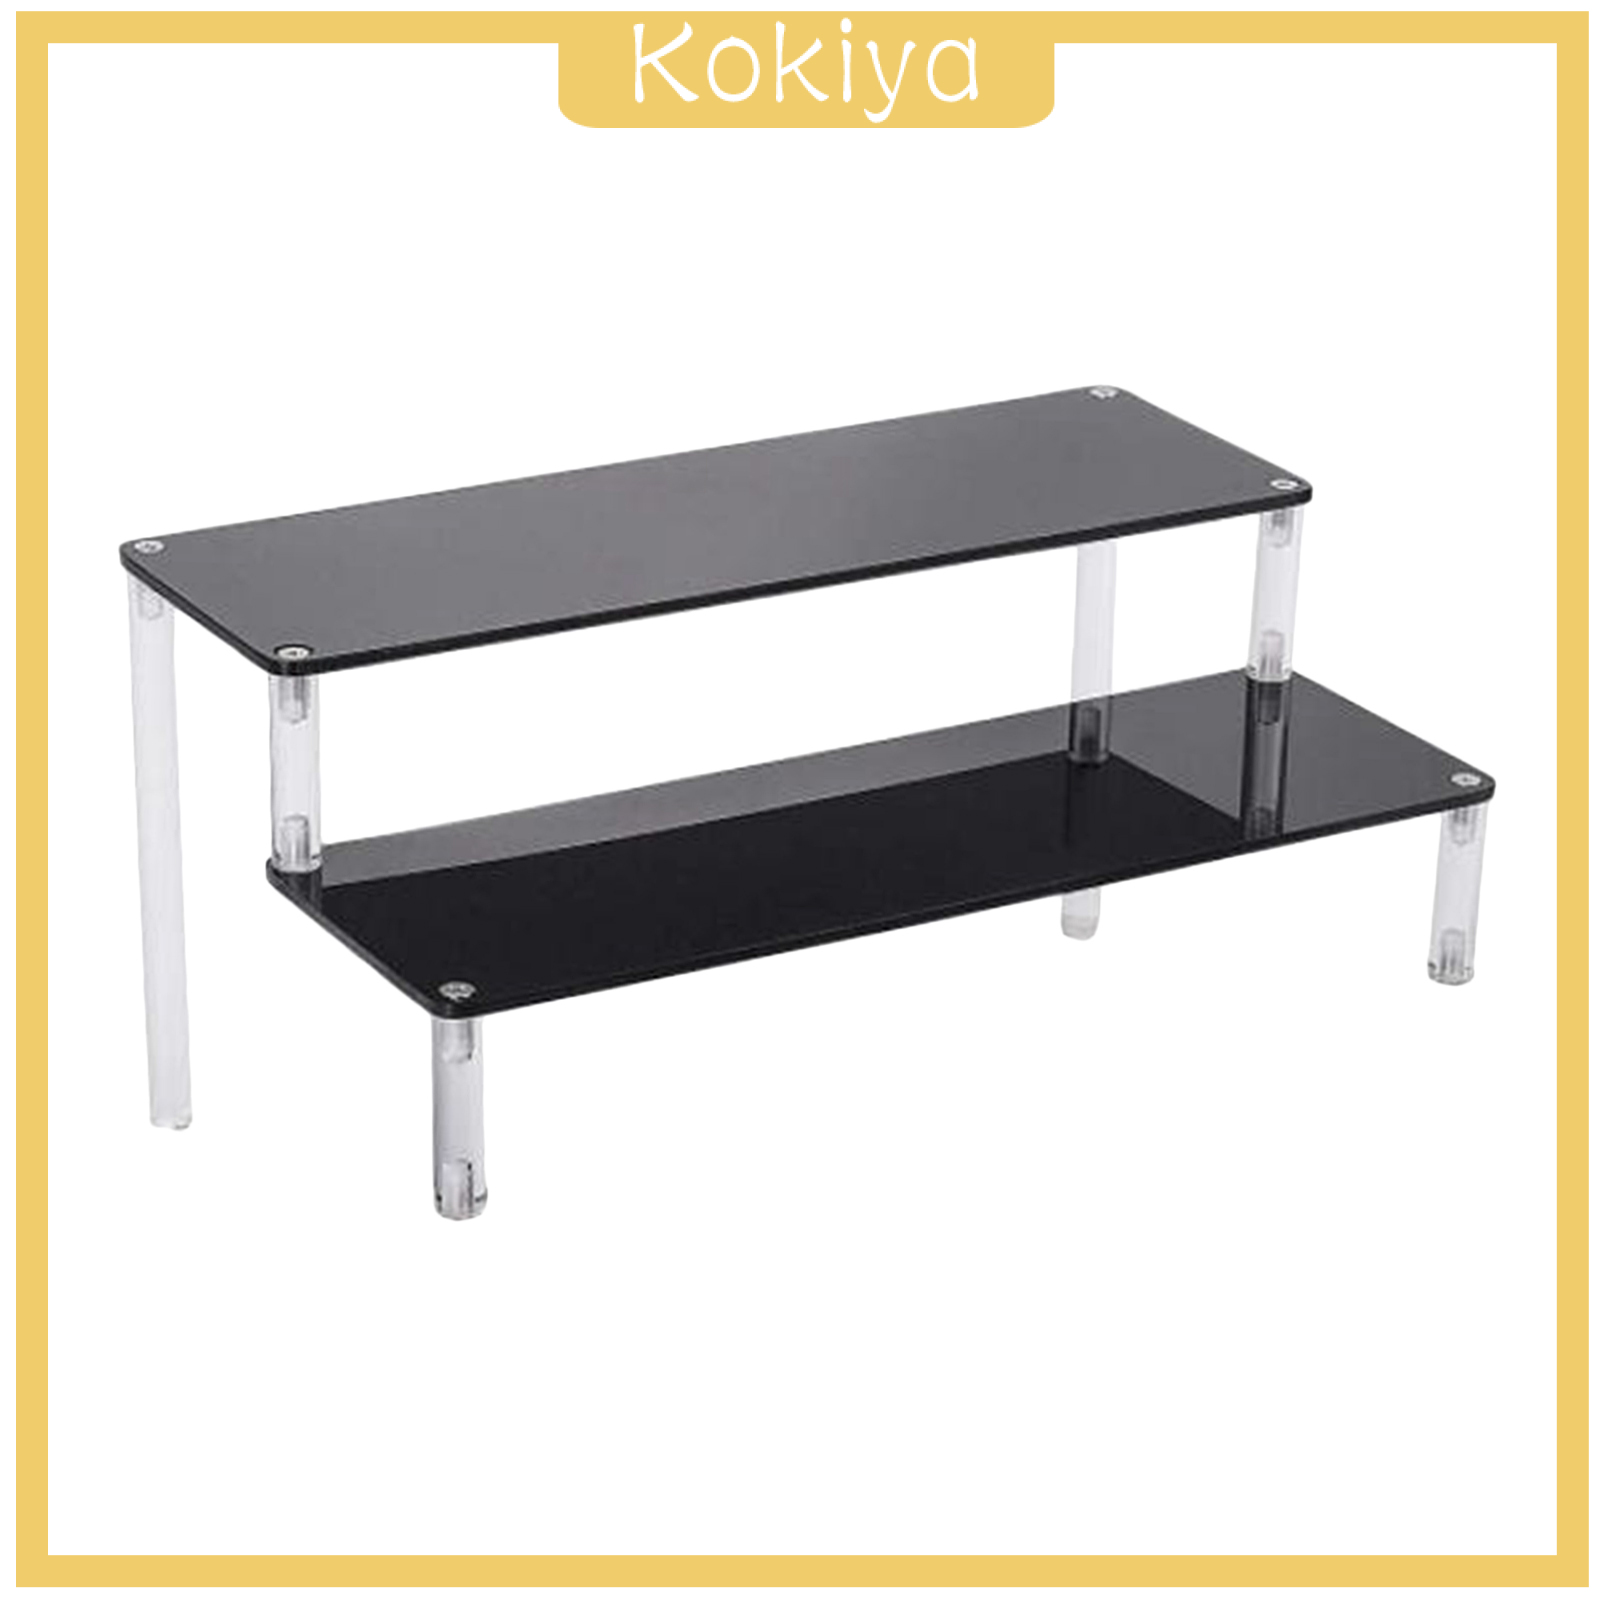 Acrylic Riser Display Shelf, 2/3 Tiered Display Stand for Display, Conutertop Desktop Acrylic Display for Decoration and Organizer